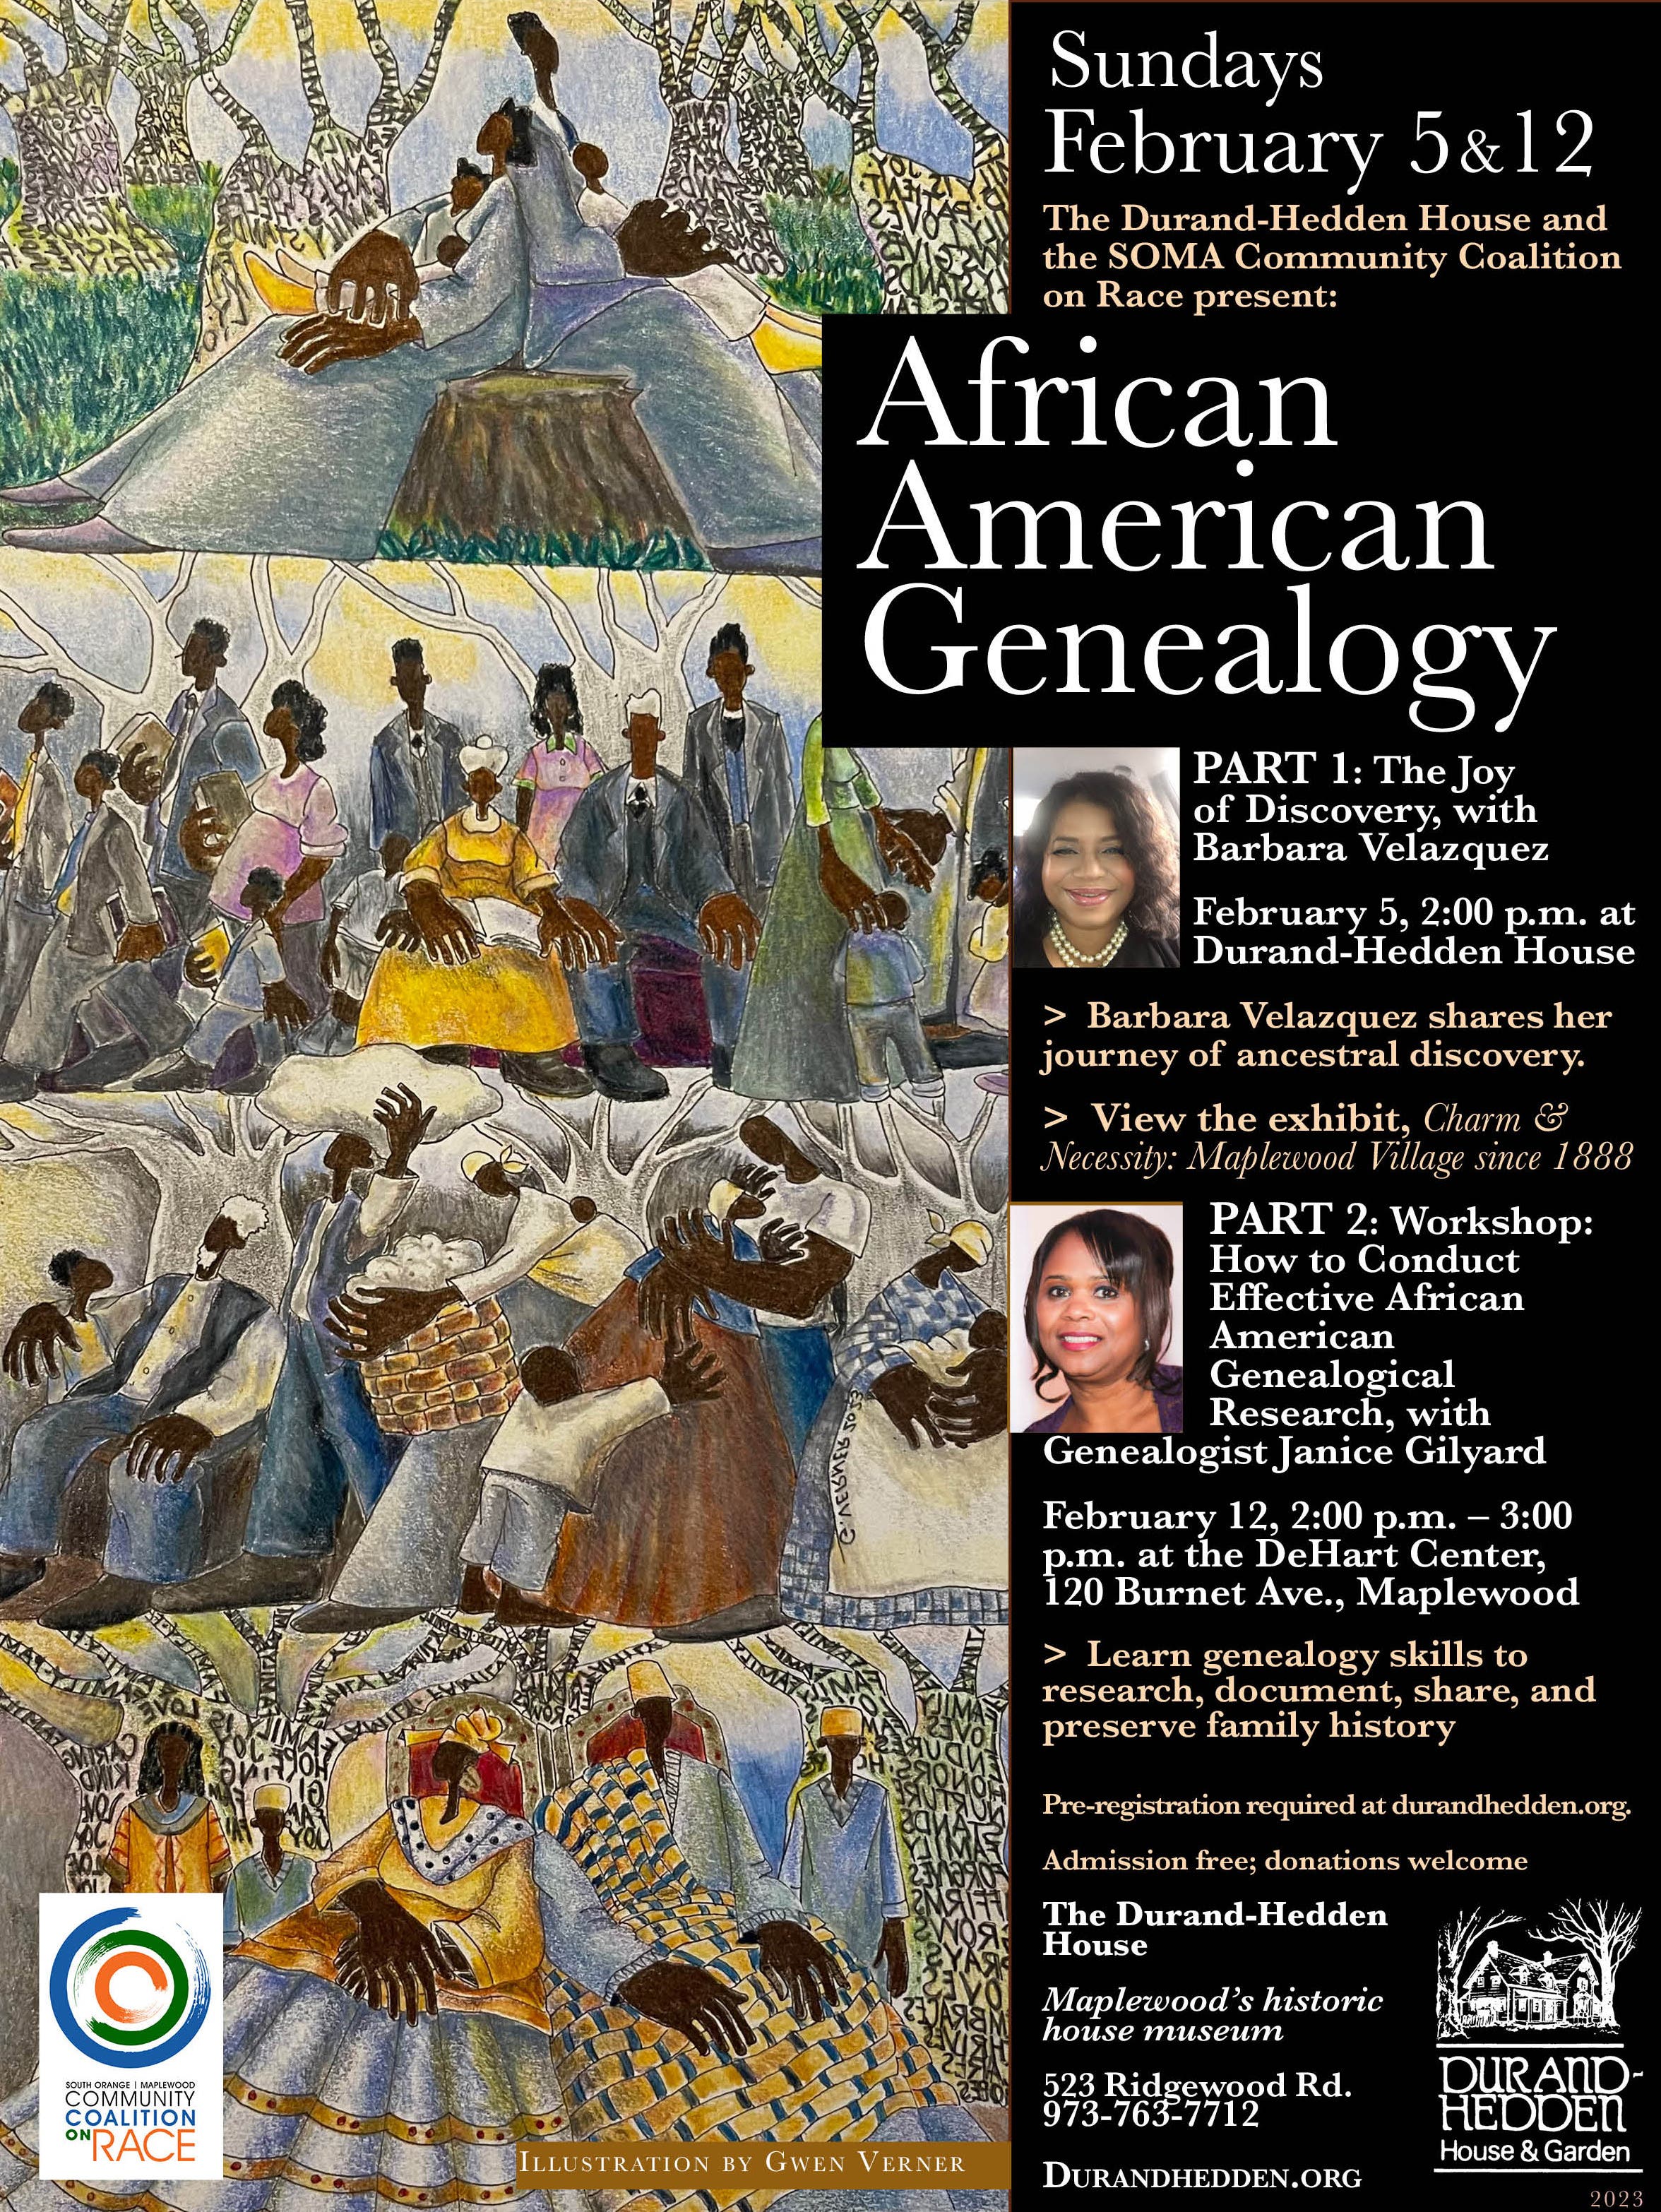 African American Genealogy: The Joy of Discovery, with Barbara Velazquez